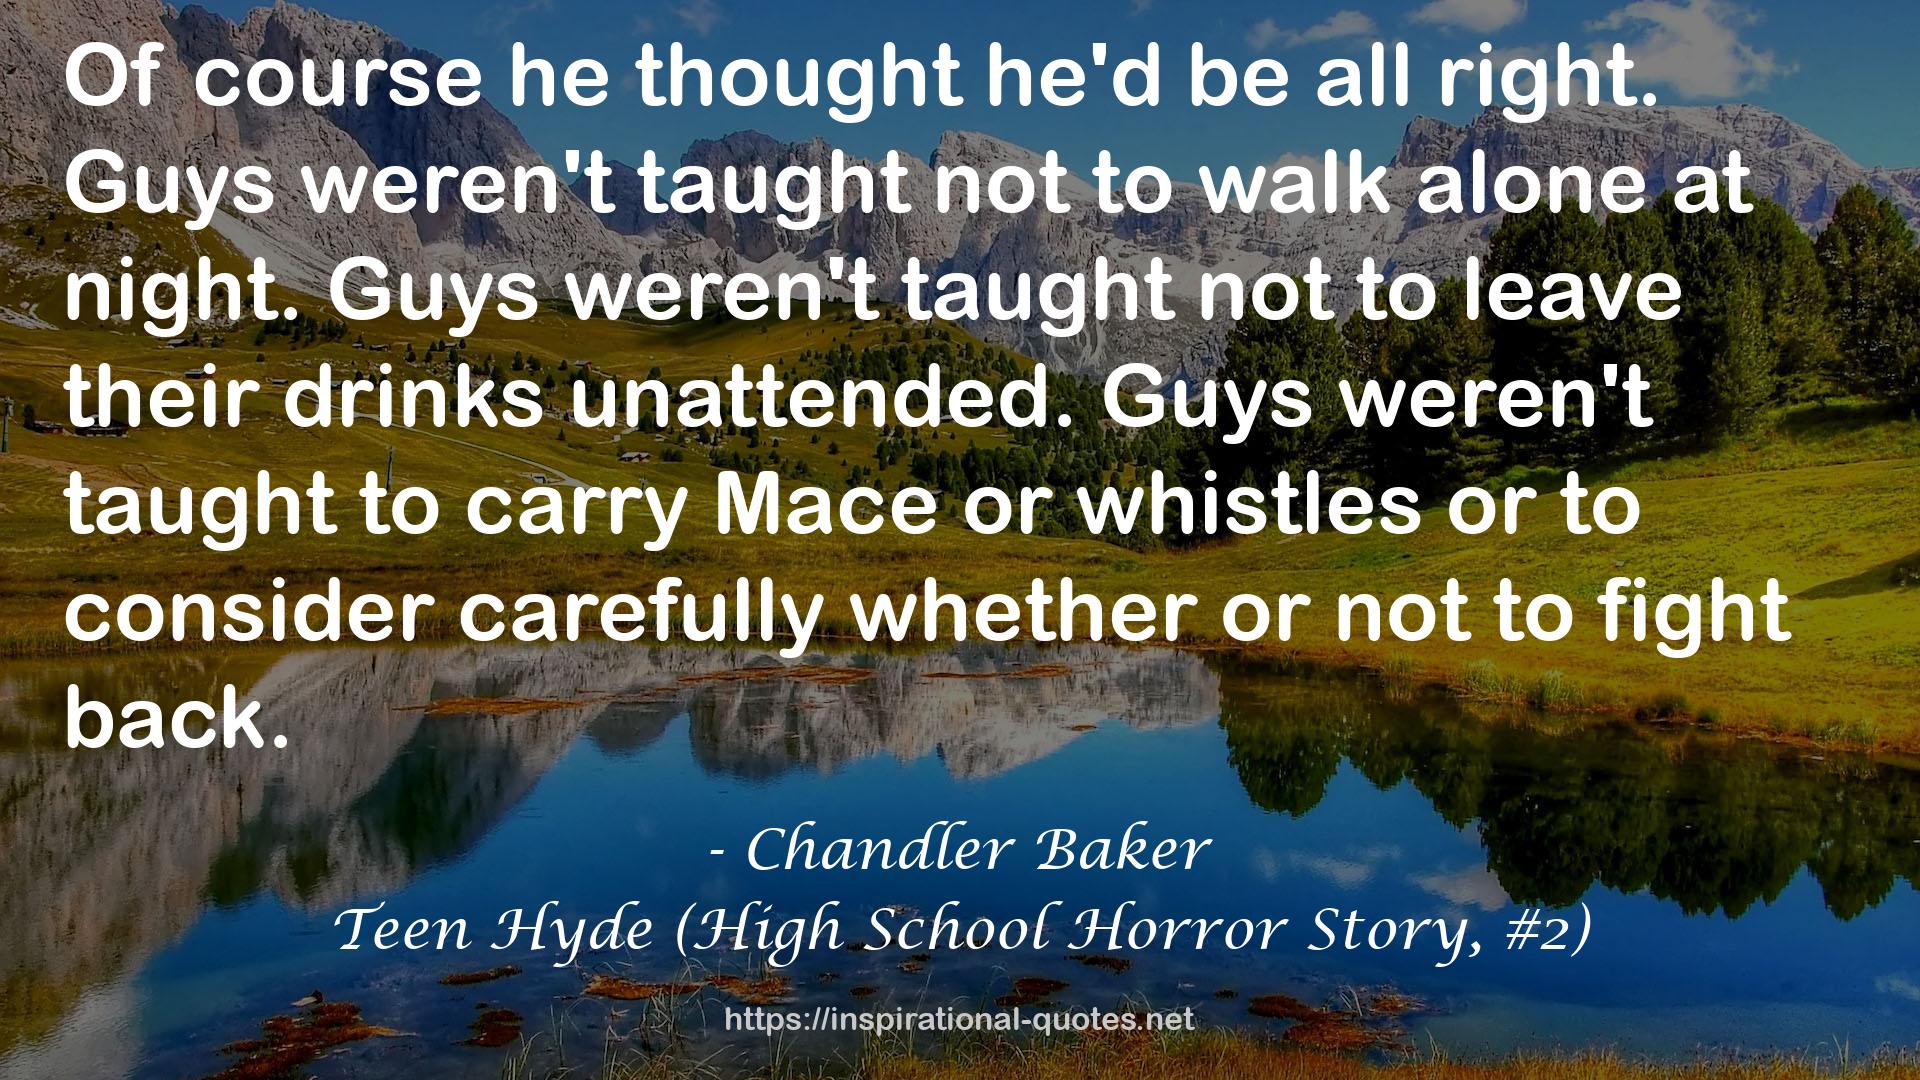 Teen Hyde (High School Horror Story, #2) QUOTES